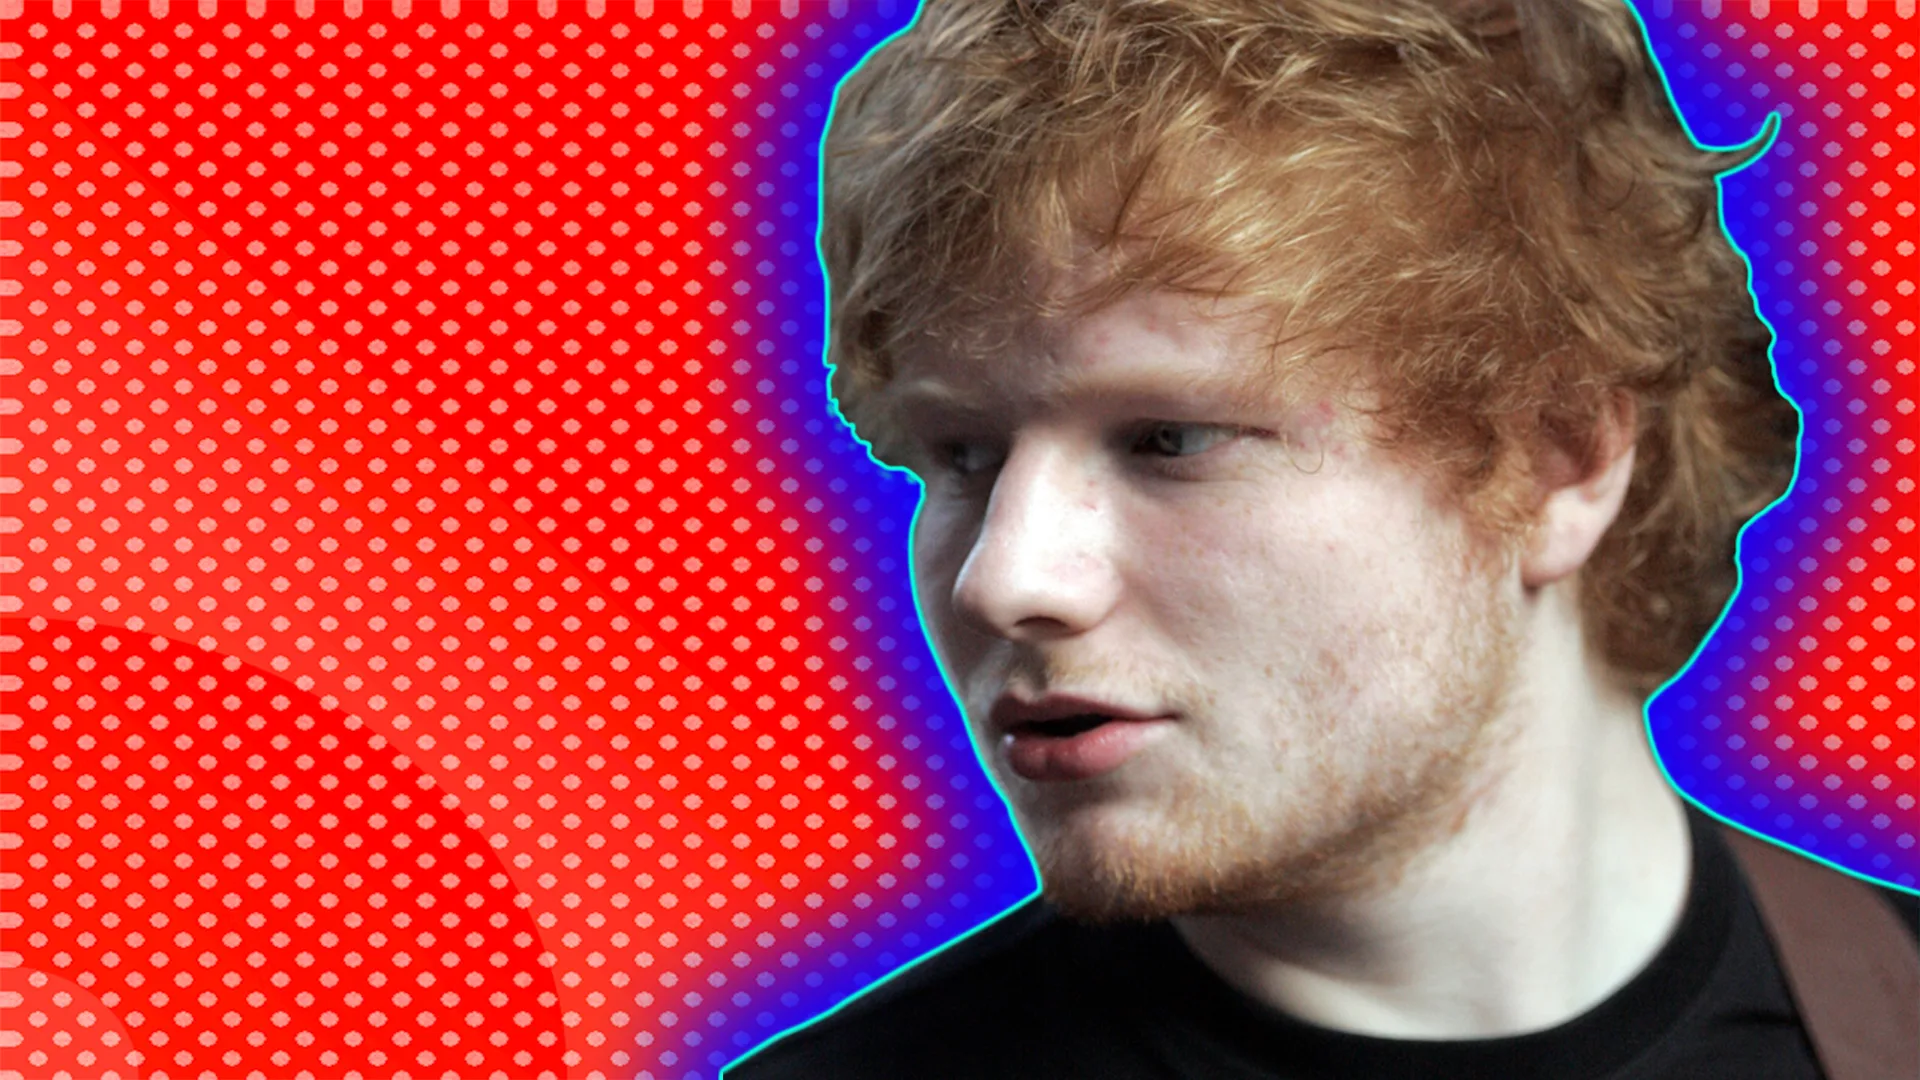 Close-up of Ed Sheeran, outlined by blue halo effect on red background dotted with white.